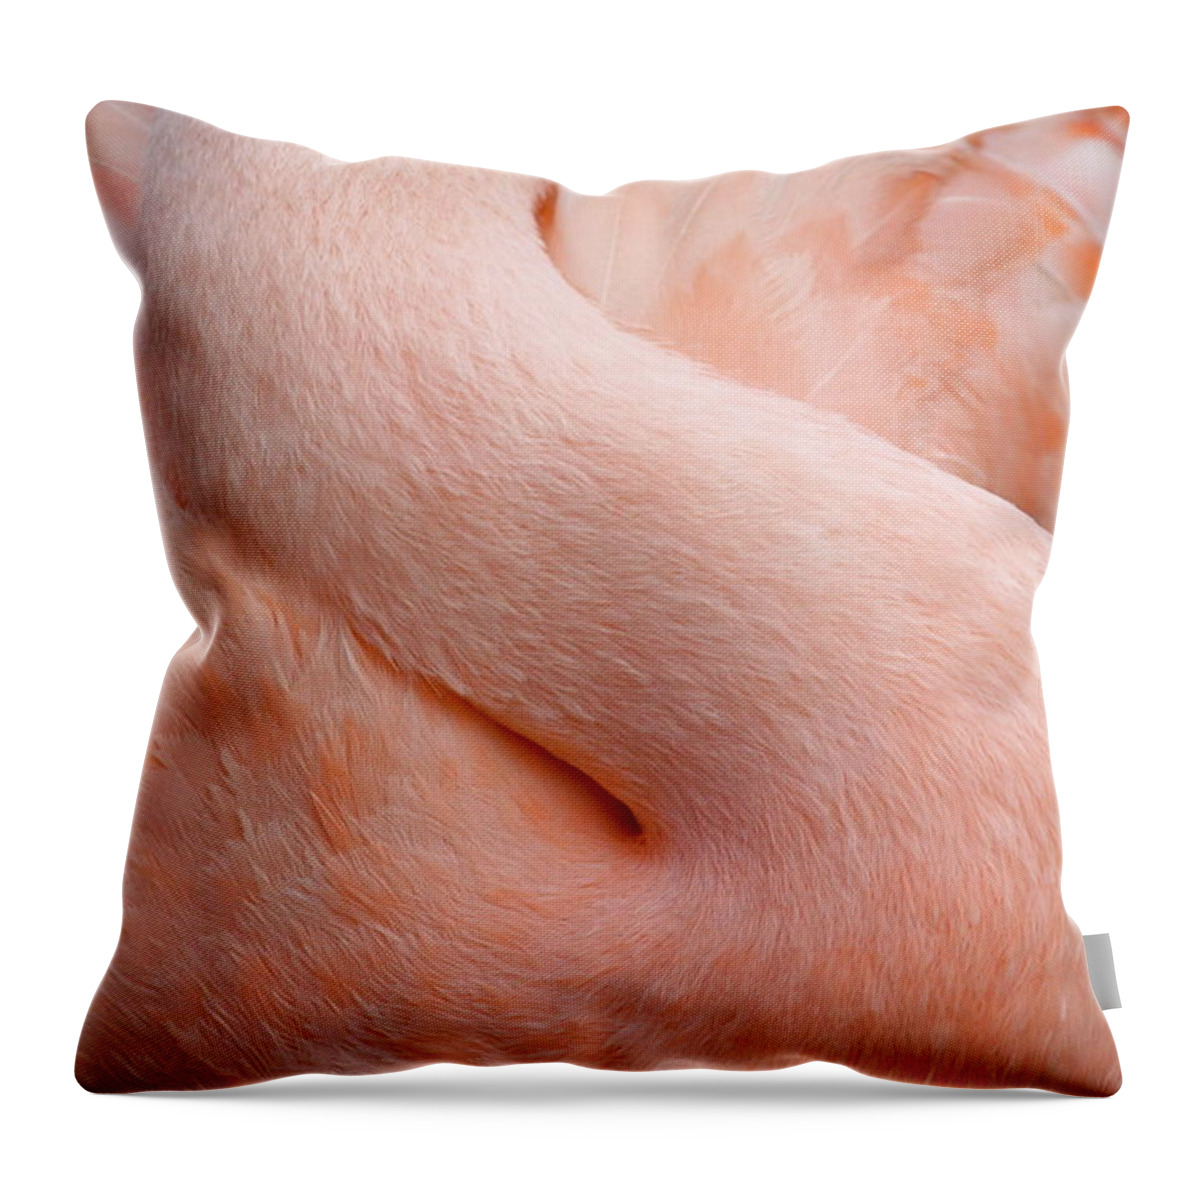 Curve Throw Pillow featuring the photograph Flamingo Neck by Mathew Spolin